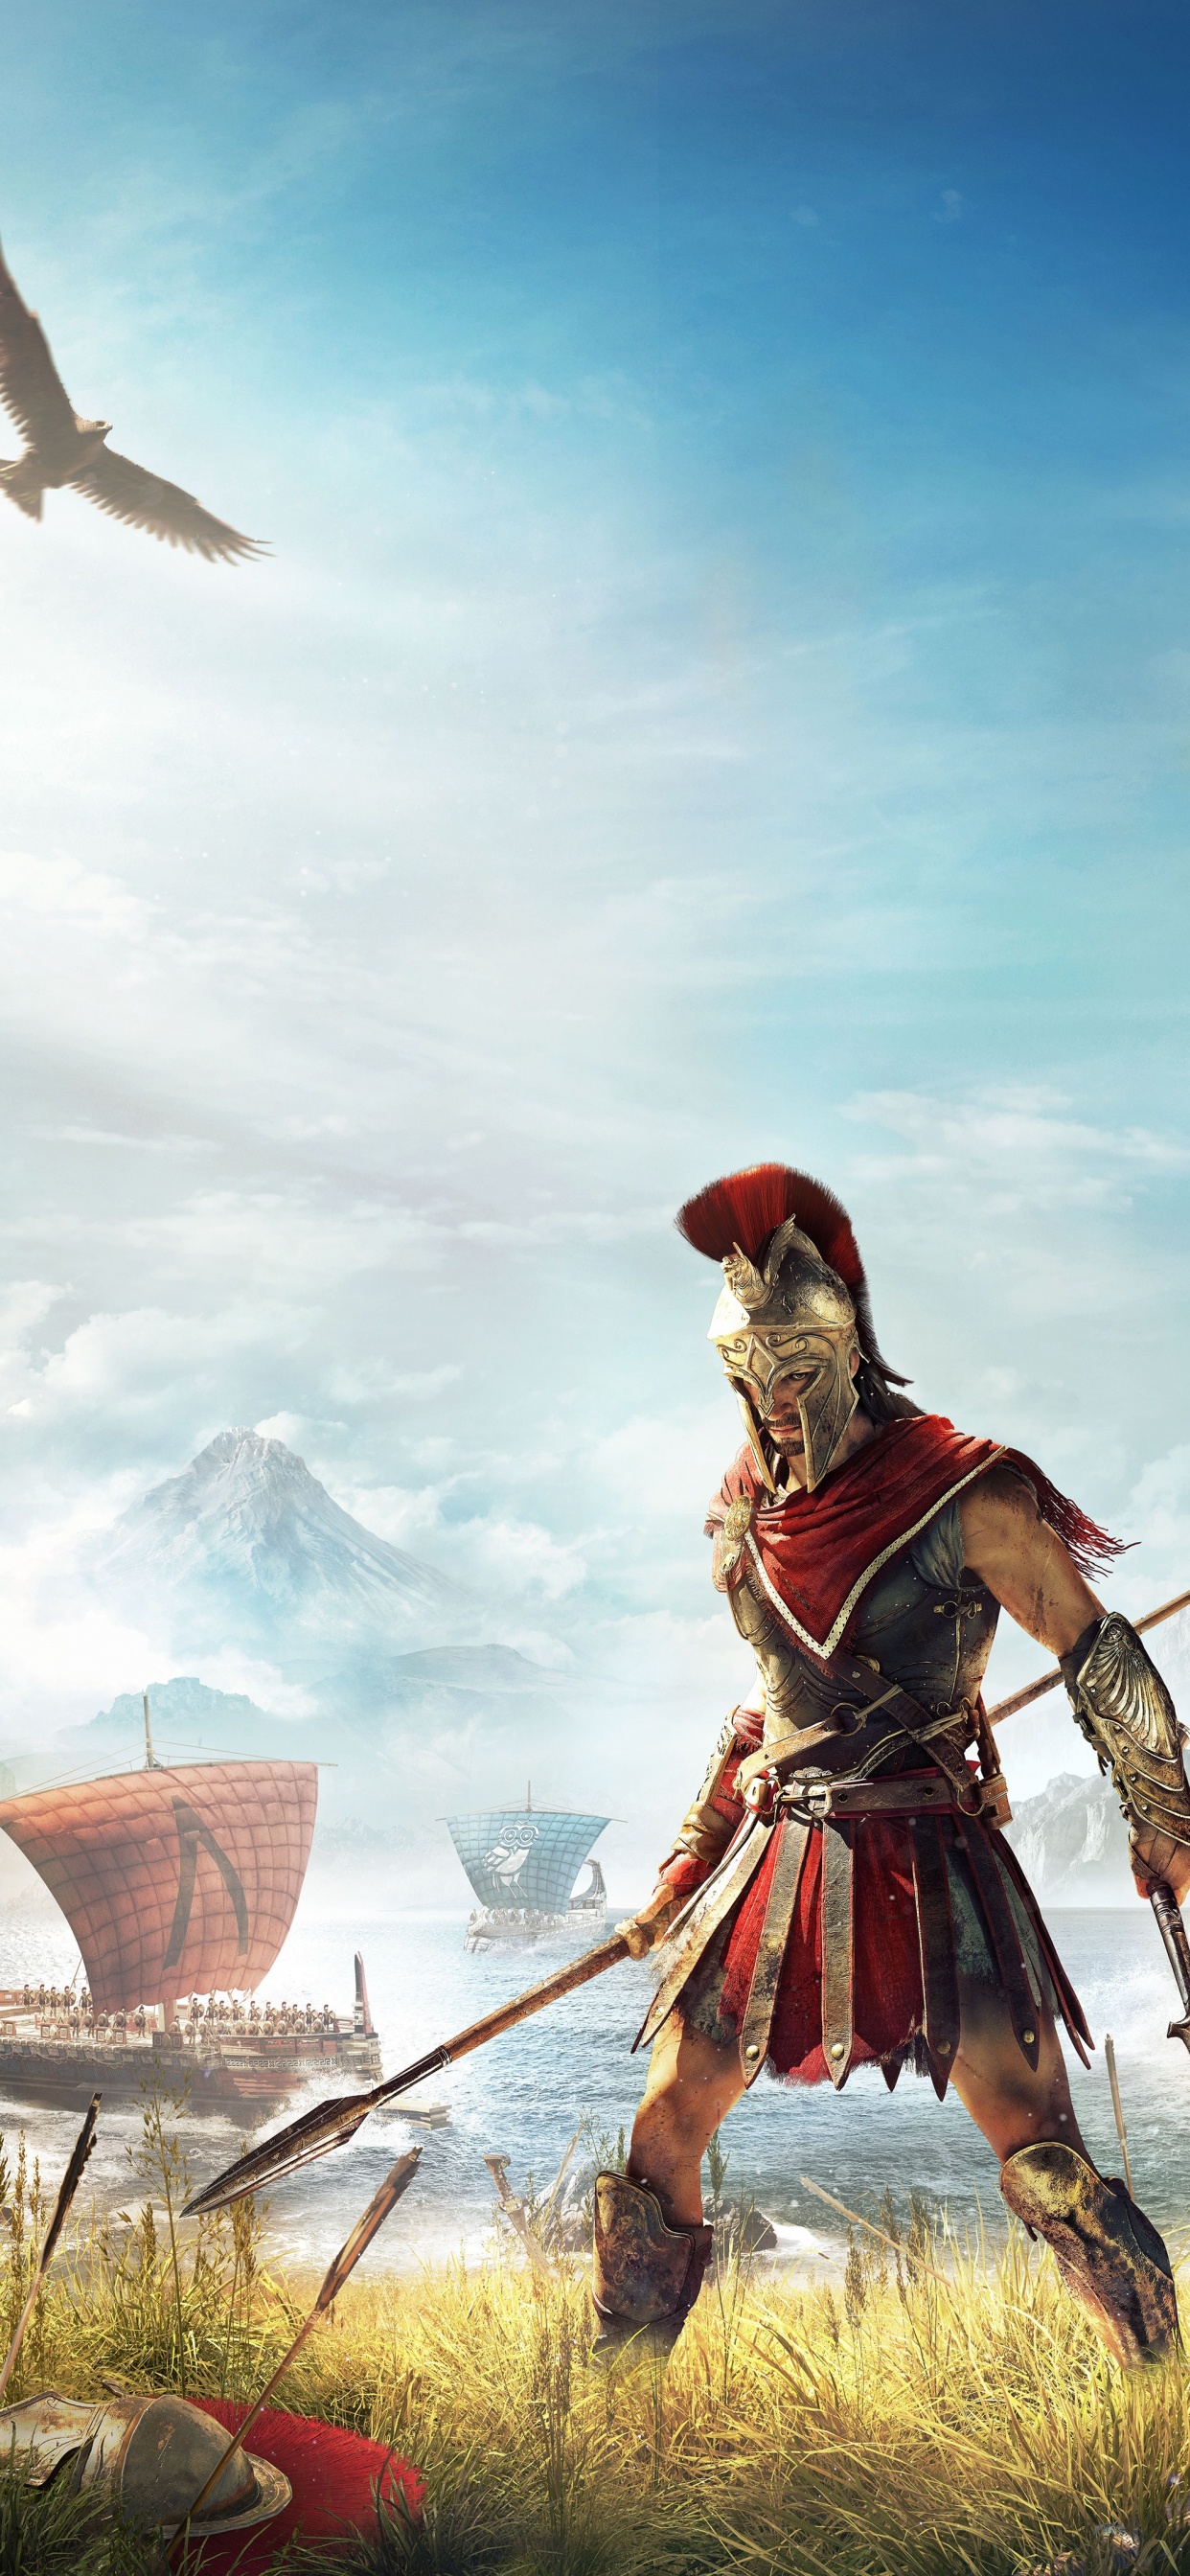 Assassins Creed Odyssey, Ubisoft, pc Game, Games, Mythology. Wallpaper in 1242x2688 Resolution